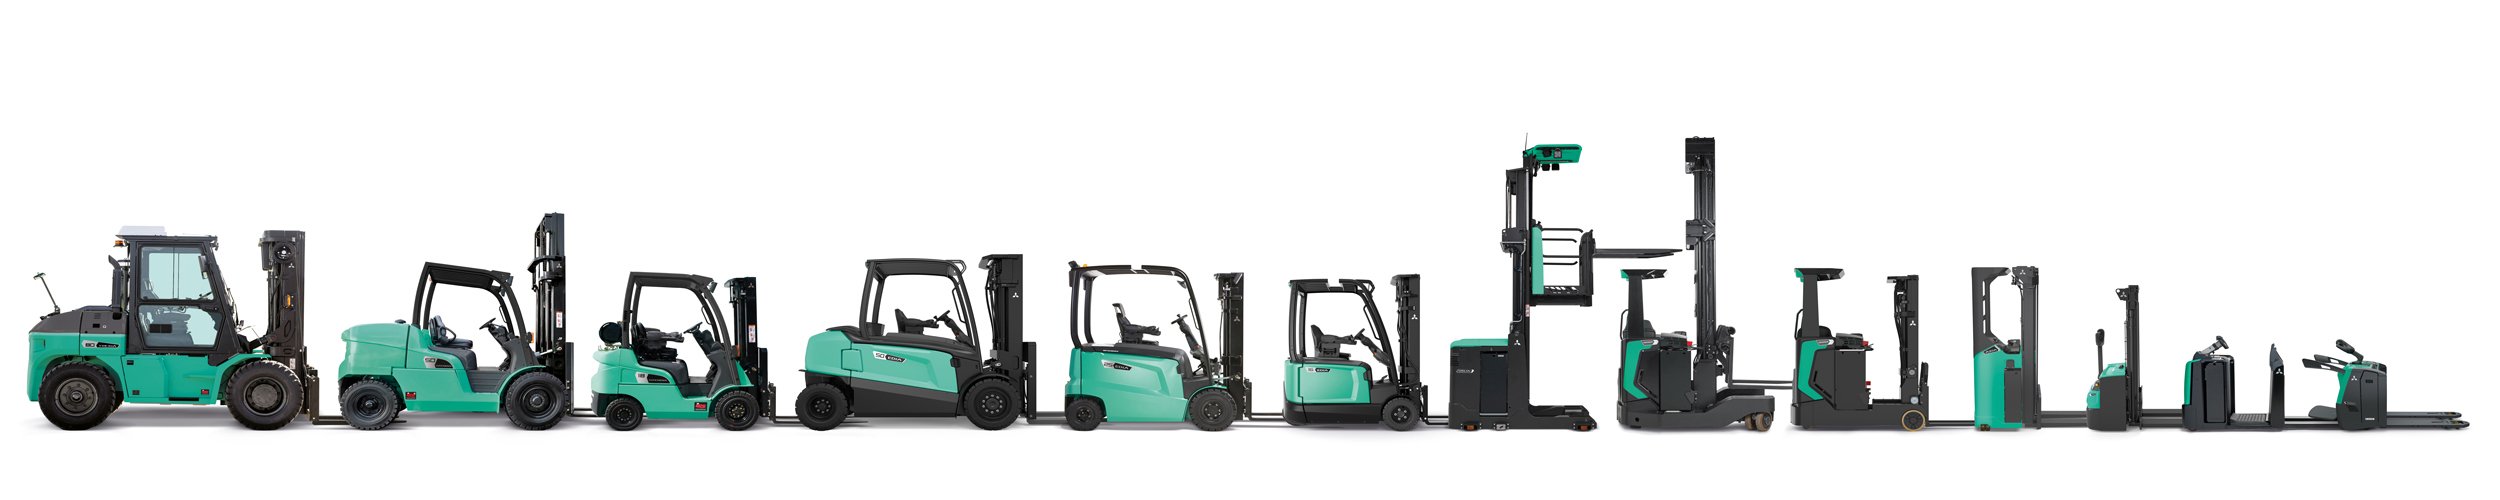 Mitsubishi Forklift Truck full product line up